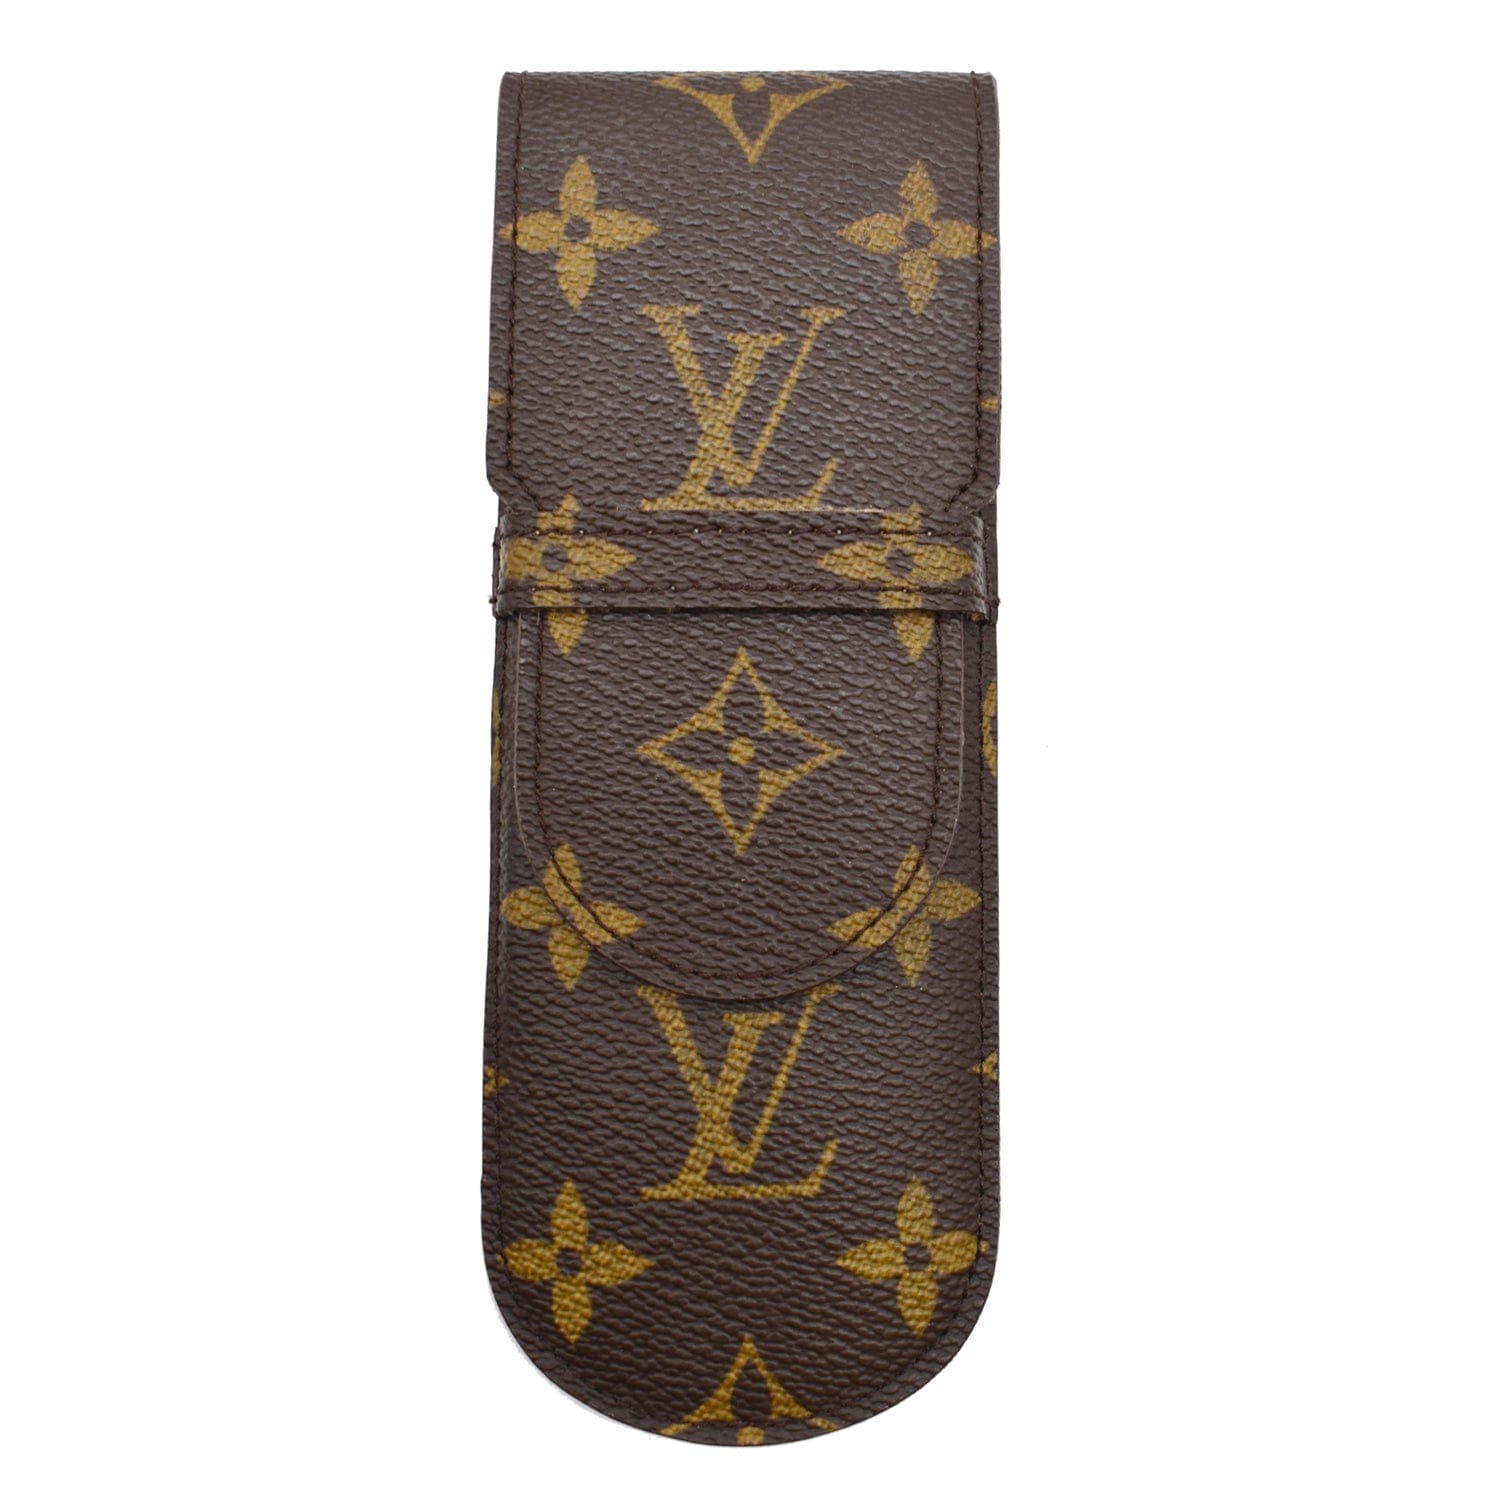 Woody Glasses Case Monogram Canvas  Sport and Lifestyle  LOUIS VUITTON